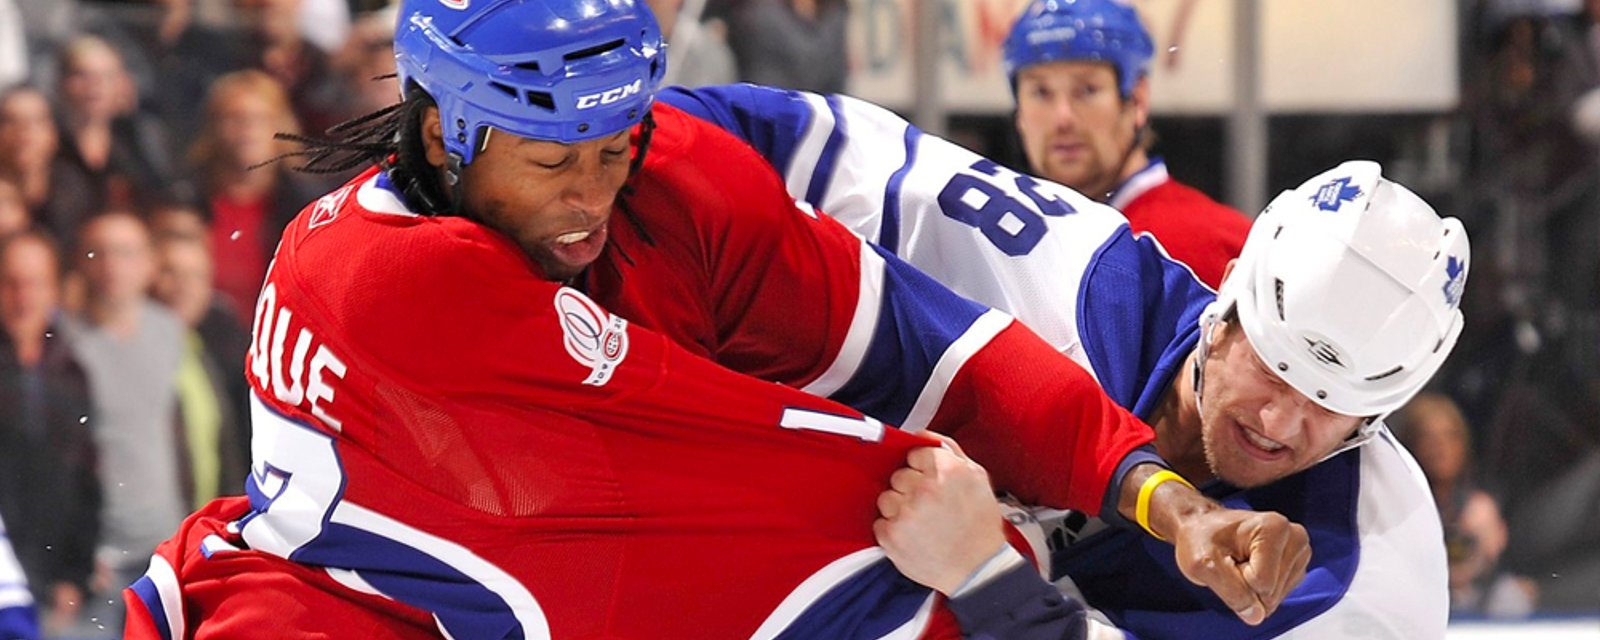 Georges Laraque released from hospital, recovering at home